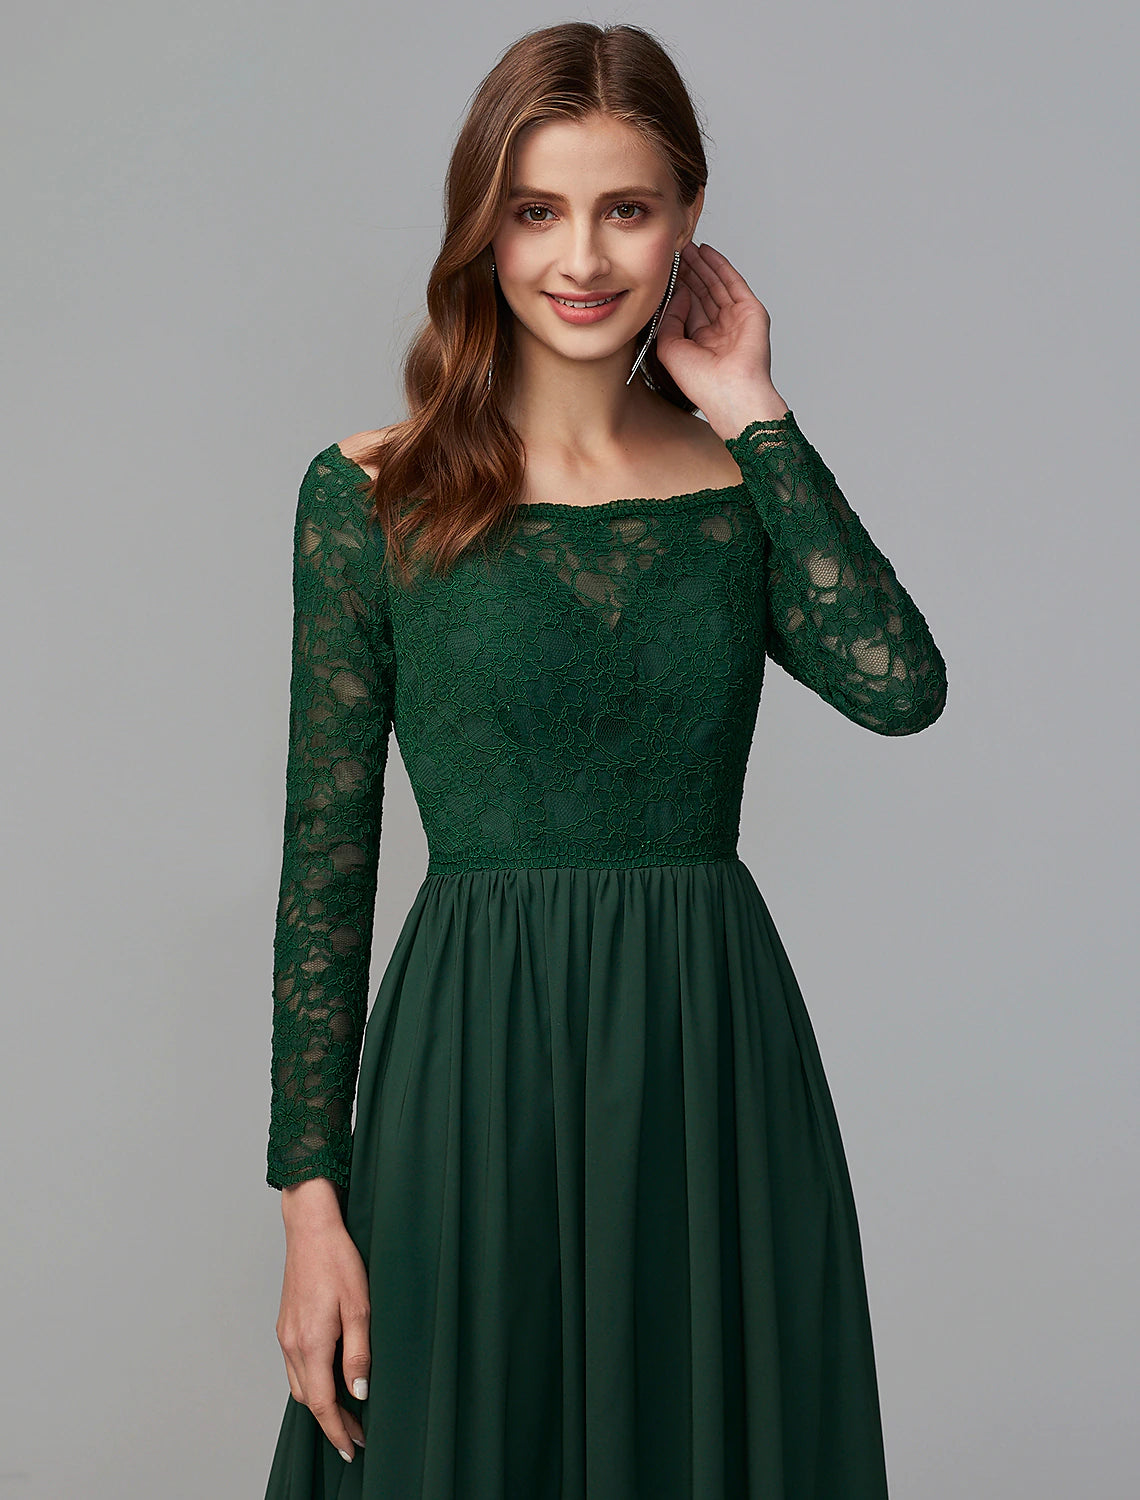 A-Line Bridesmaid Dress Off Shoulder Long Sleeve Elegant Floor Length Chiffon / Lace with Lace